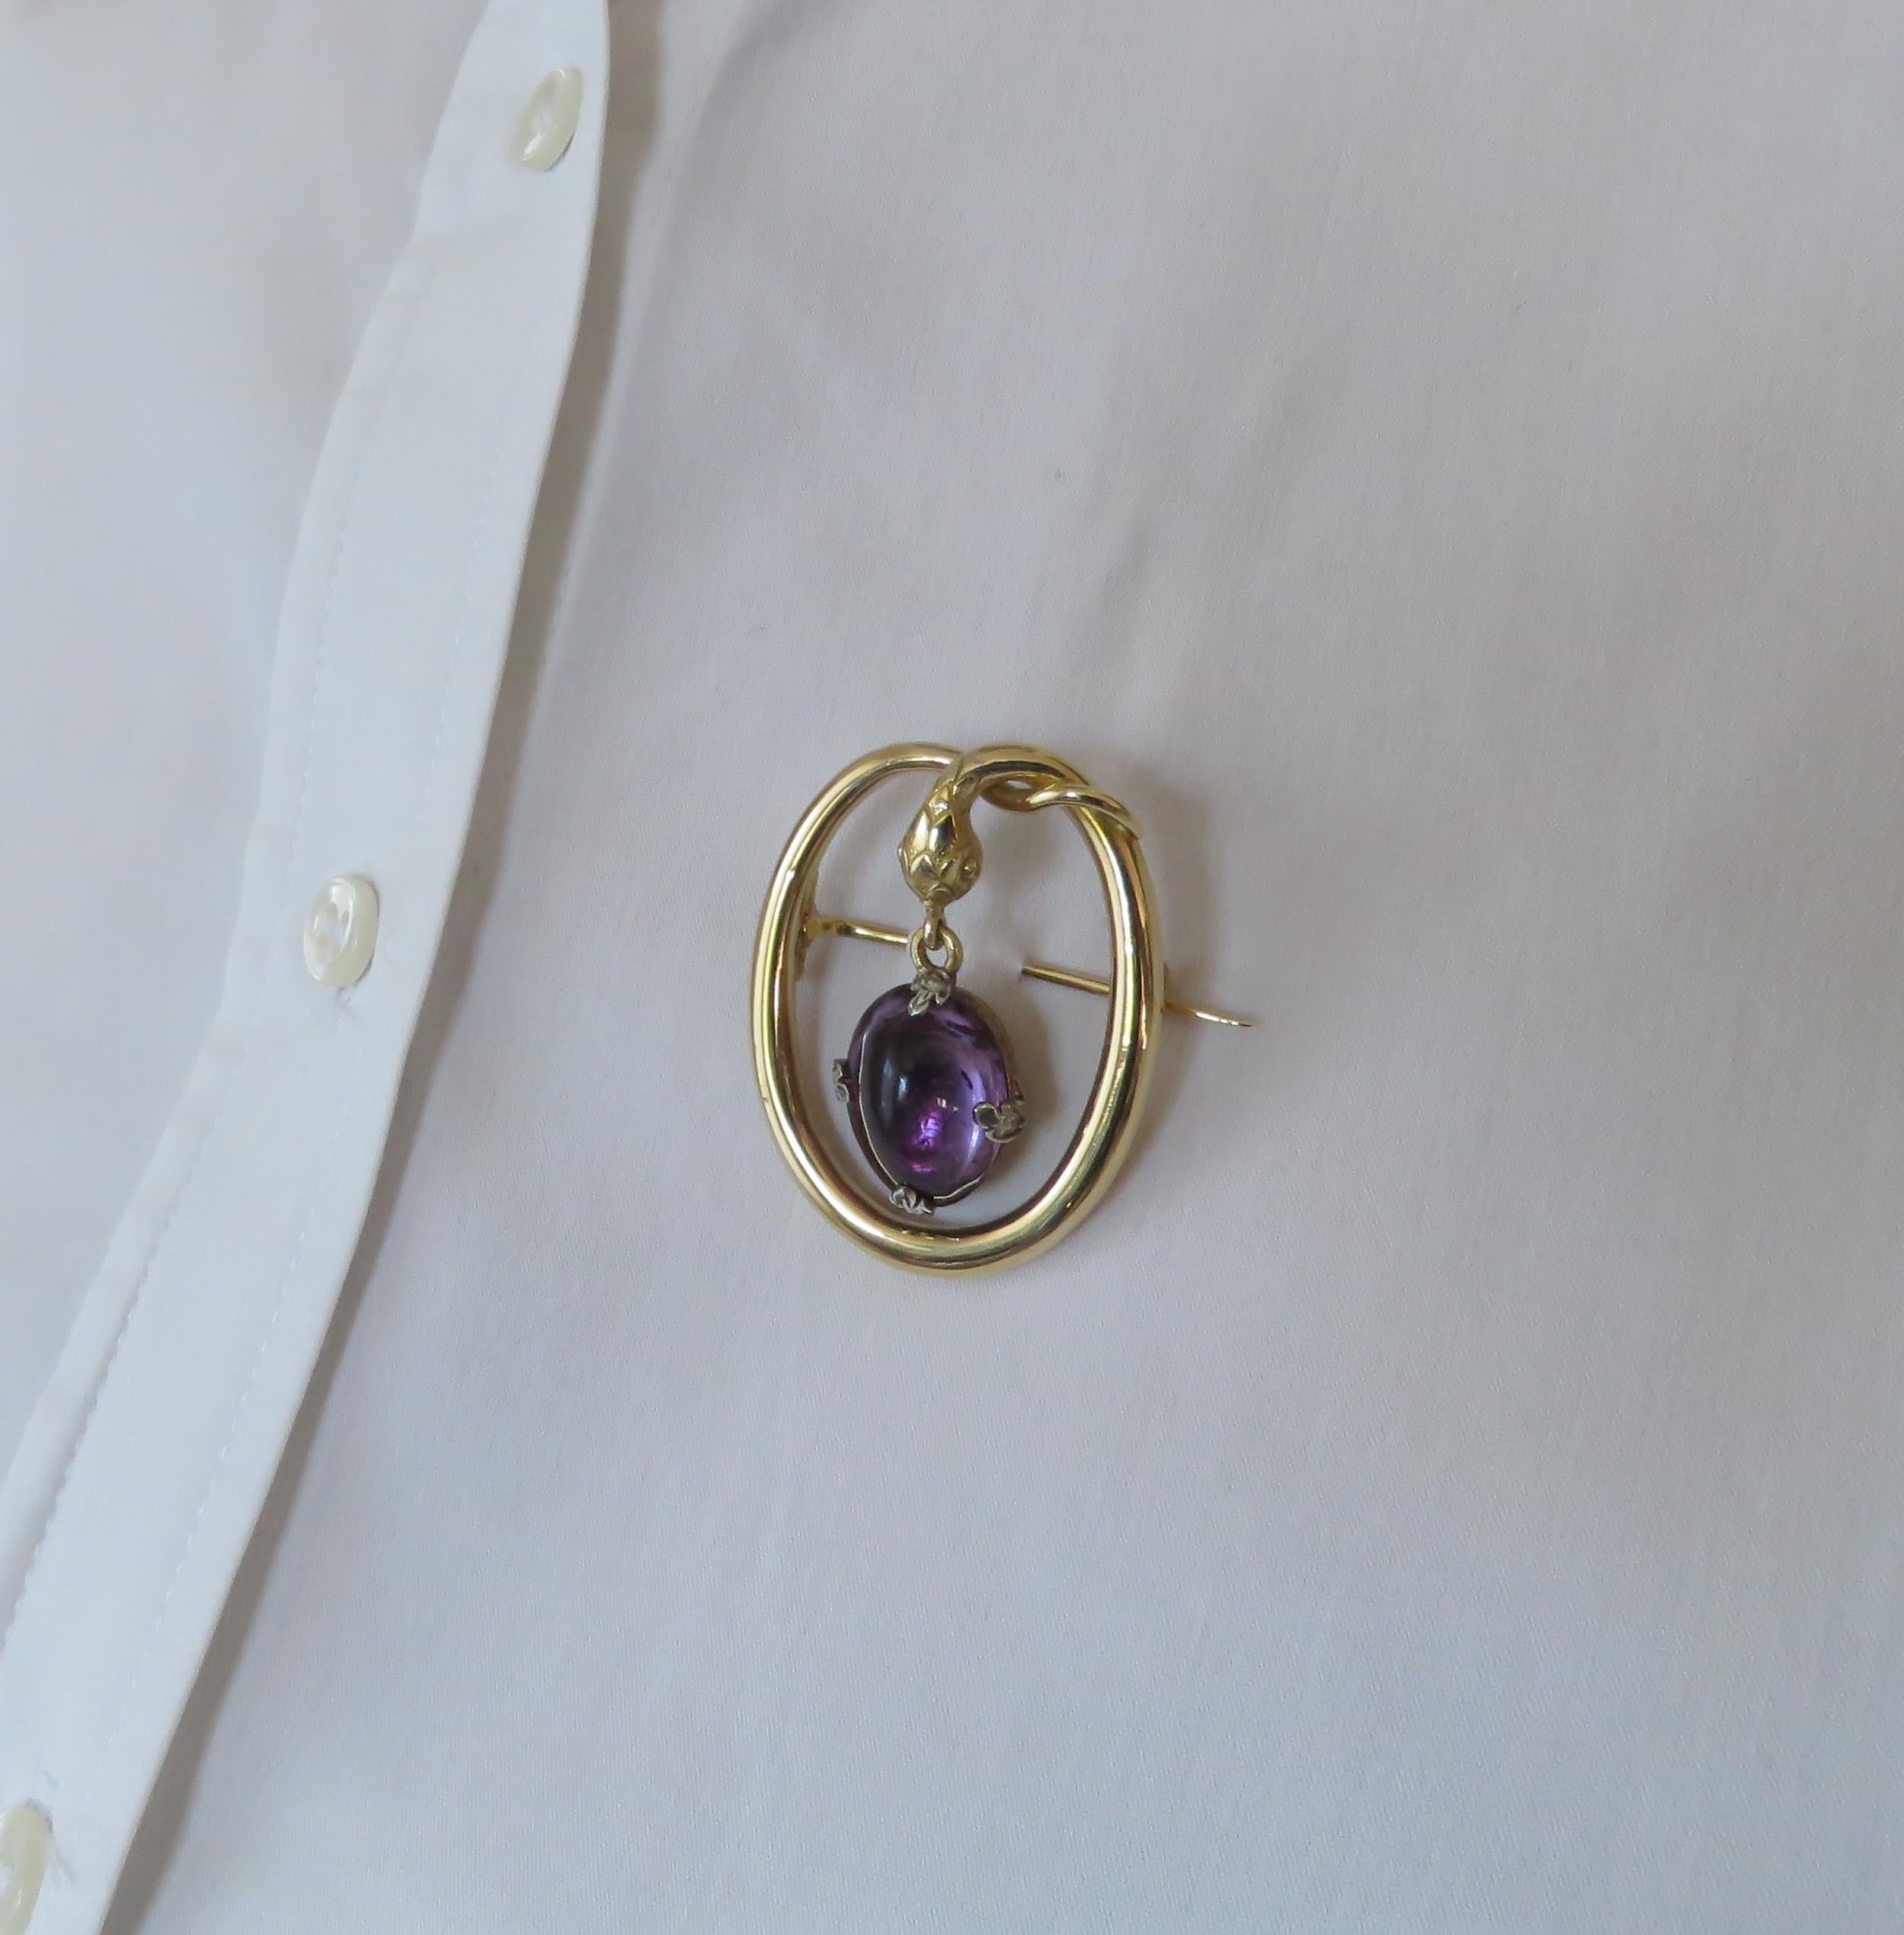 Lovely 18 karat yellow gold snake vintage brooch. The size is 37X30mm / 1.456x1.181 inches.The  amethyst cabochon cut  and oval shaped and is held by 4 claws in 18 karat white gold with 4 rose cut diamonds.  with a safety clasp. Marked with the Mark